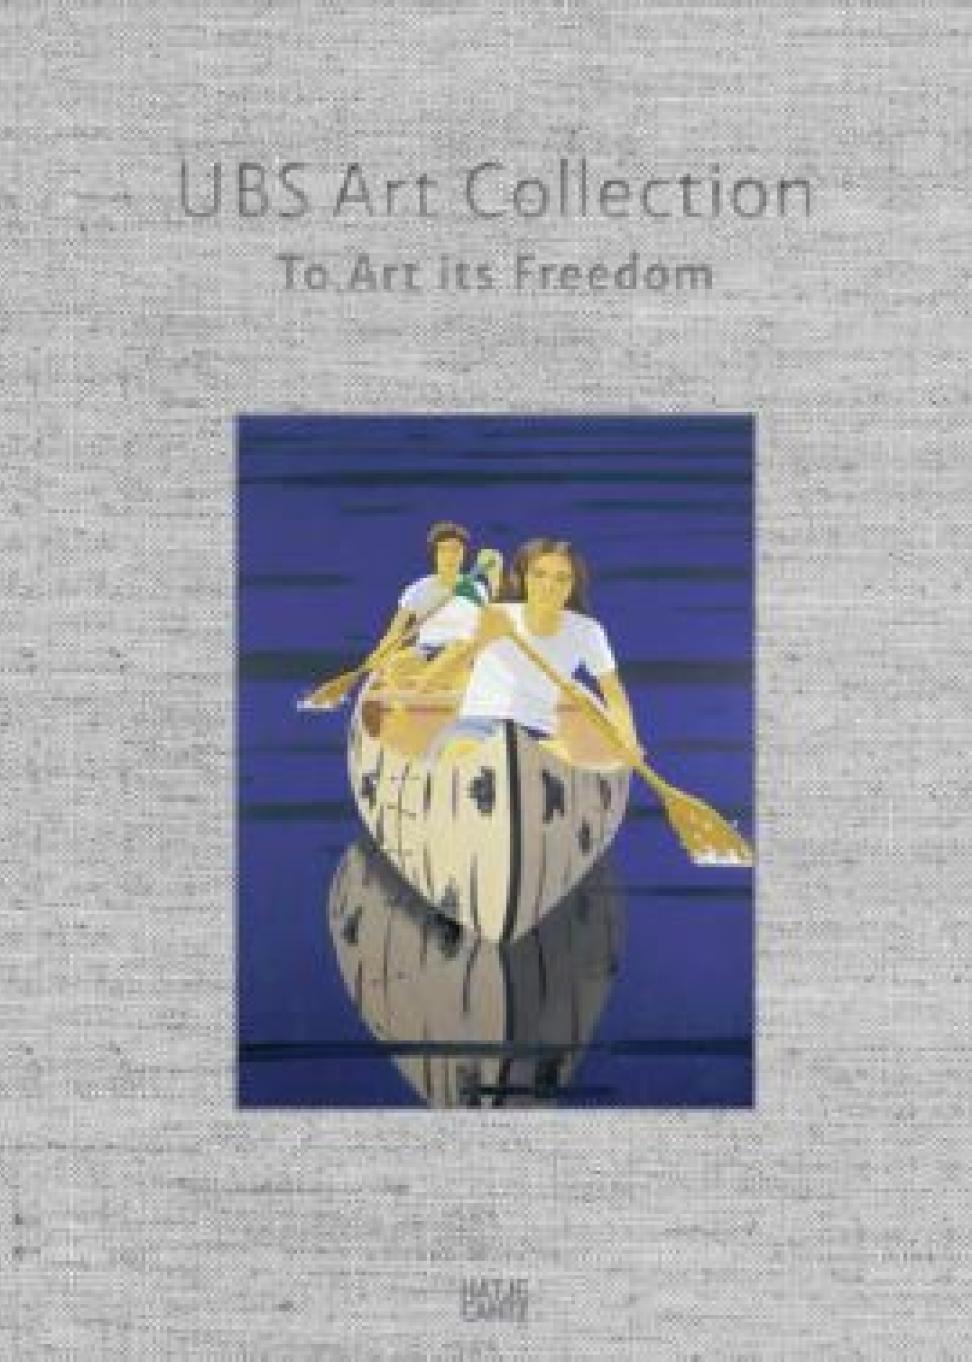 UBS Art Collection: To Art its Freedom